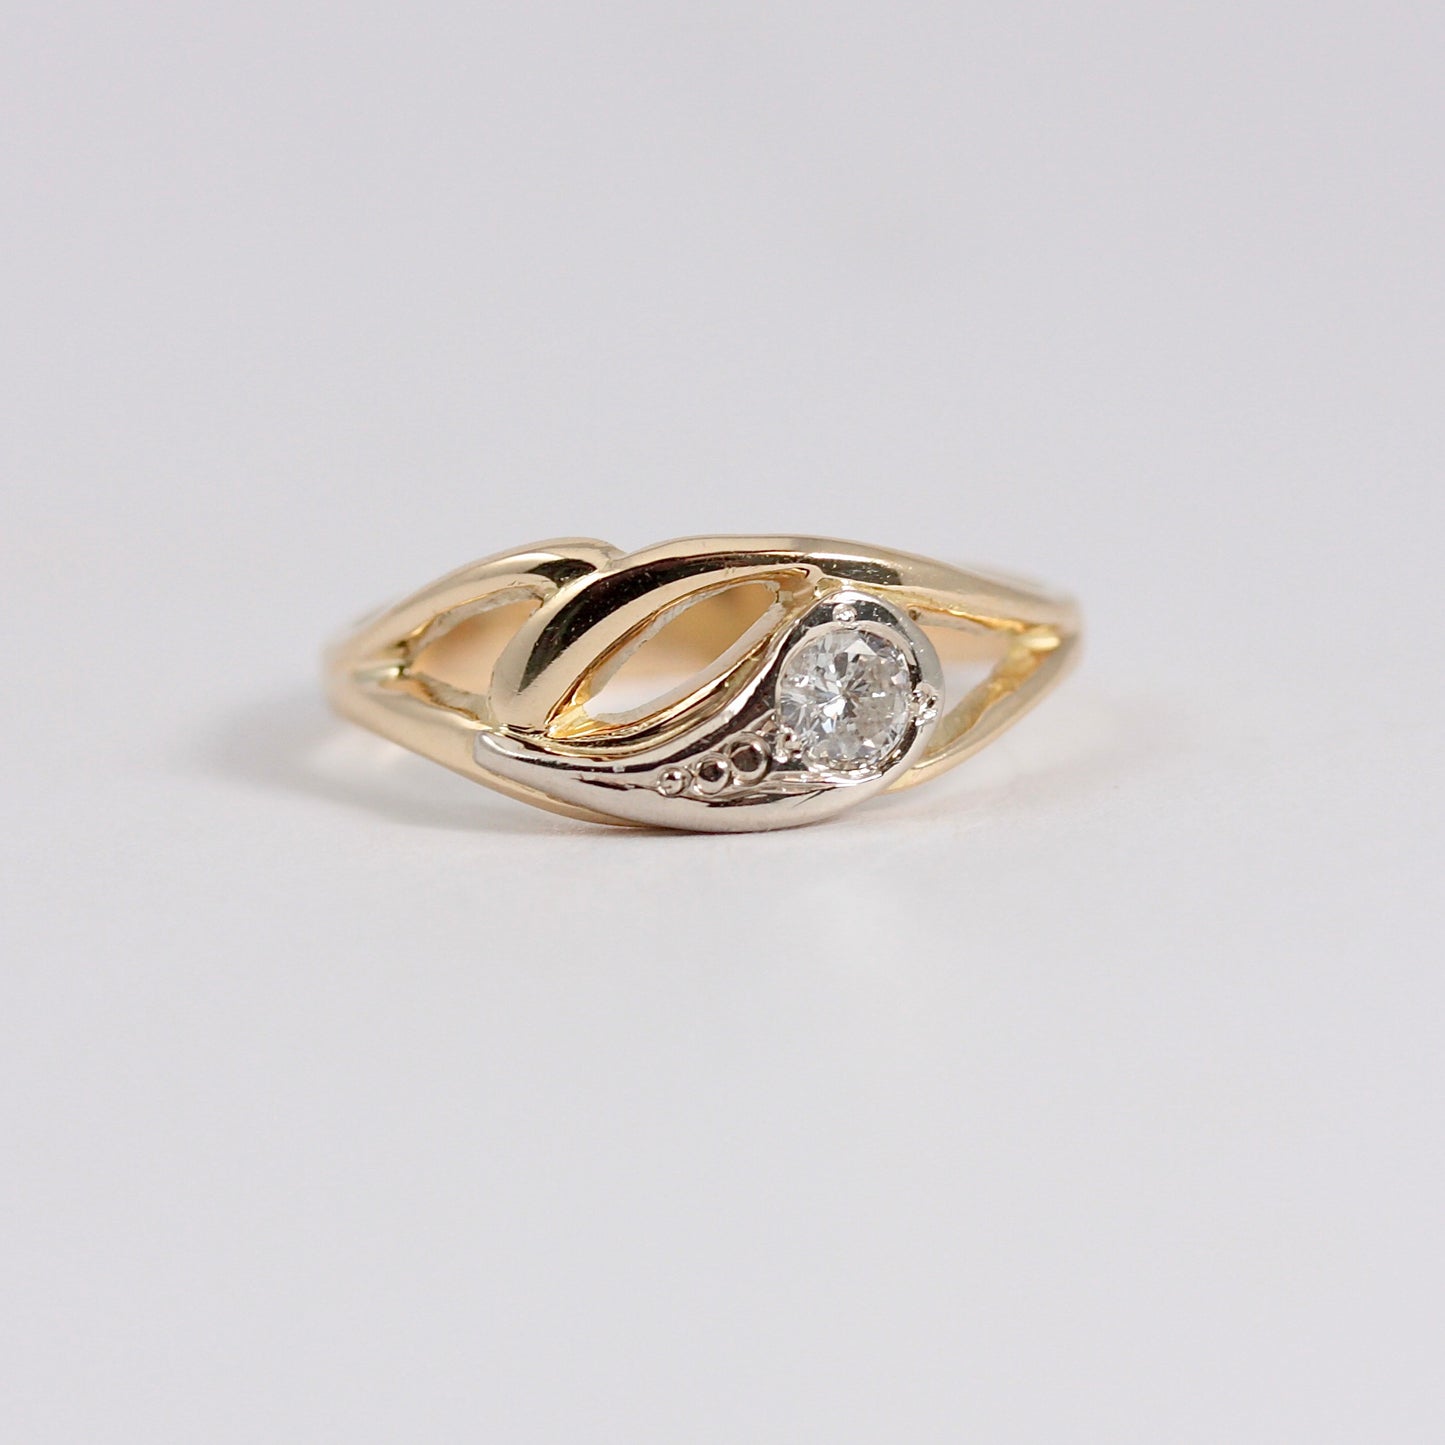 Vintage Diamond Solitaire Ring in 14K Gold